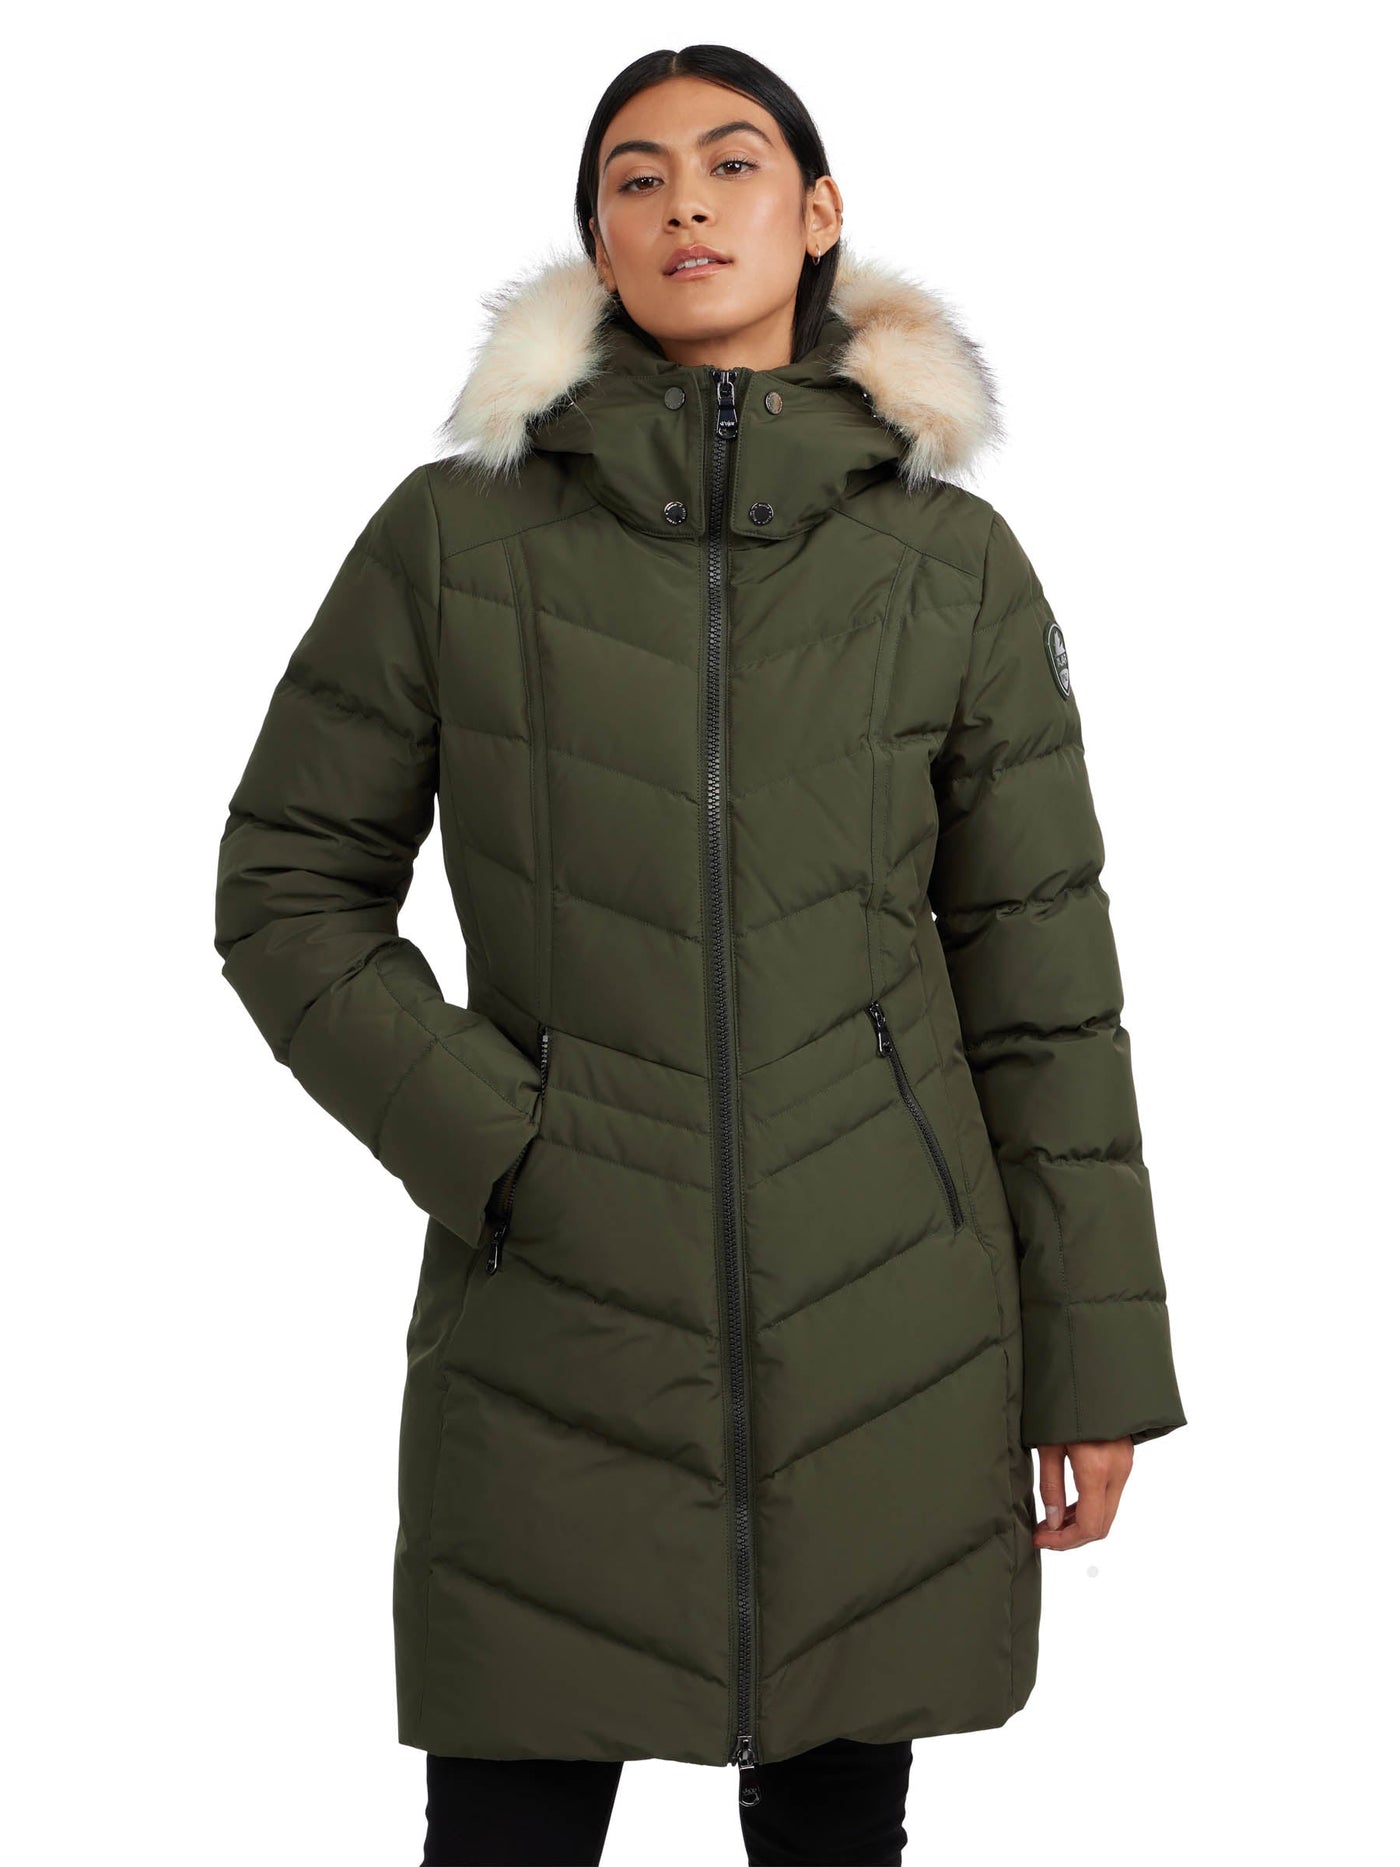 January Women's Quilted Puffer w/ Faux Fur